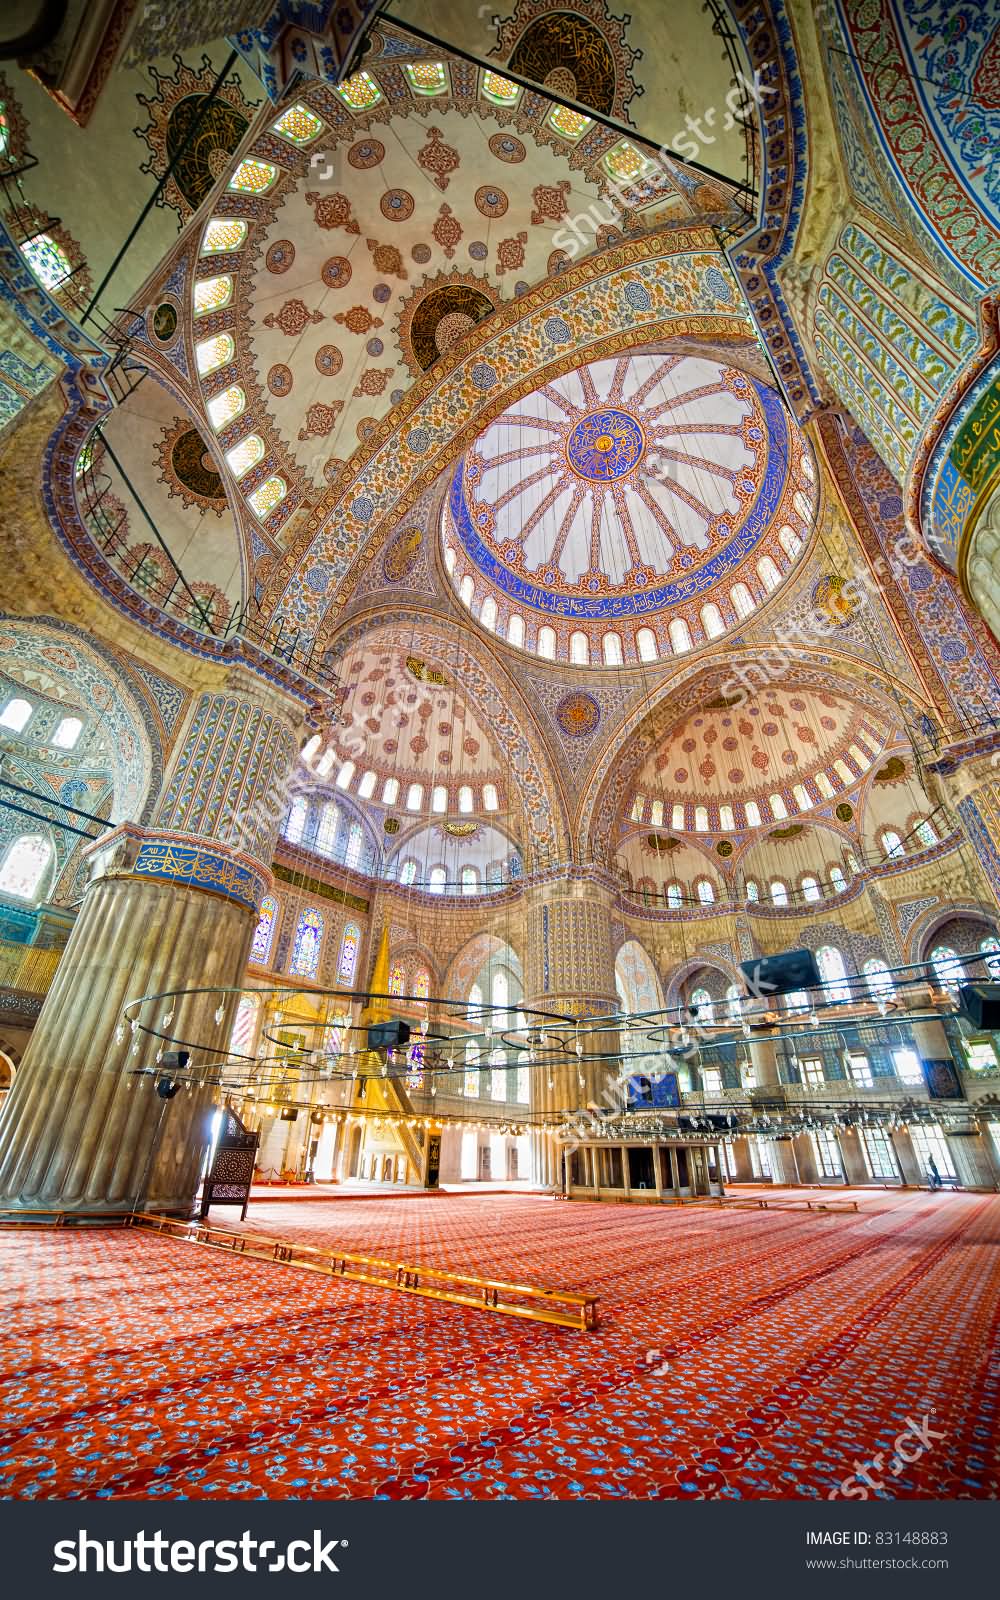 Prayer Hall Of Blue Mosque With Beautiful Architecture